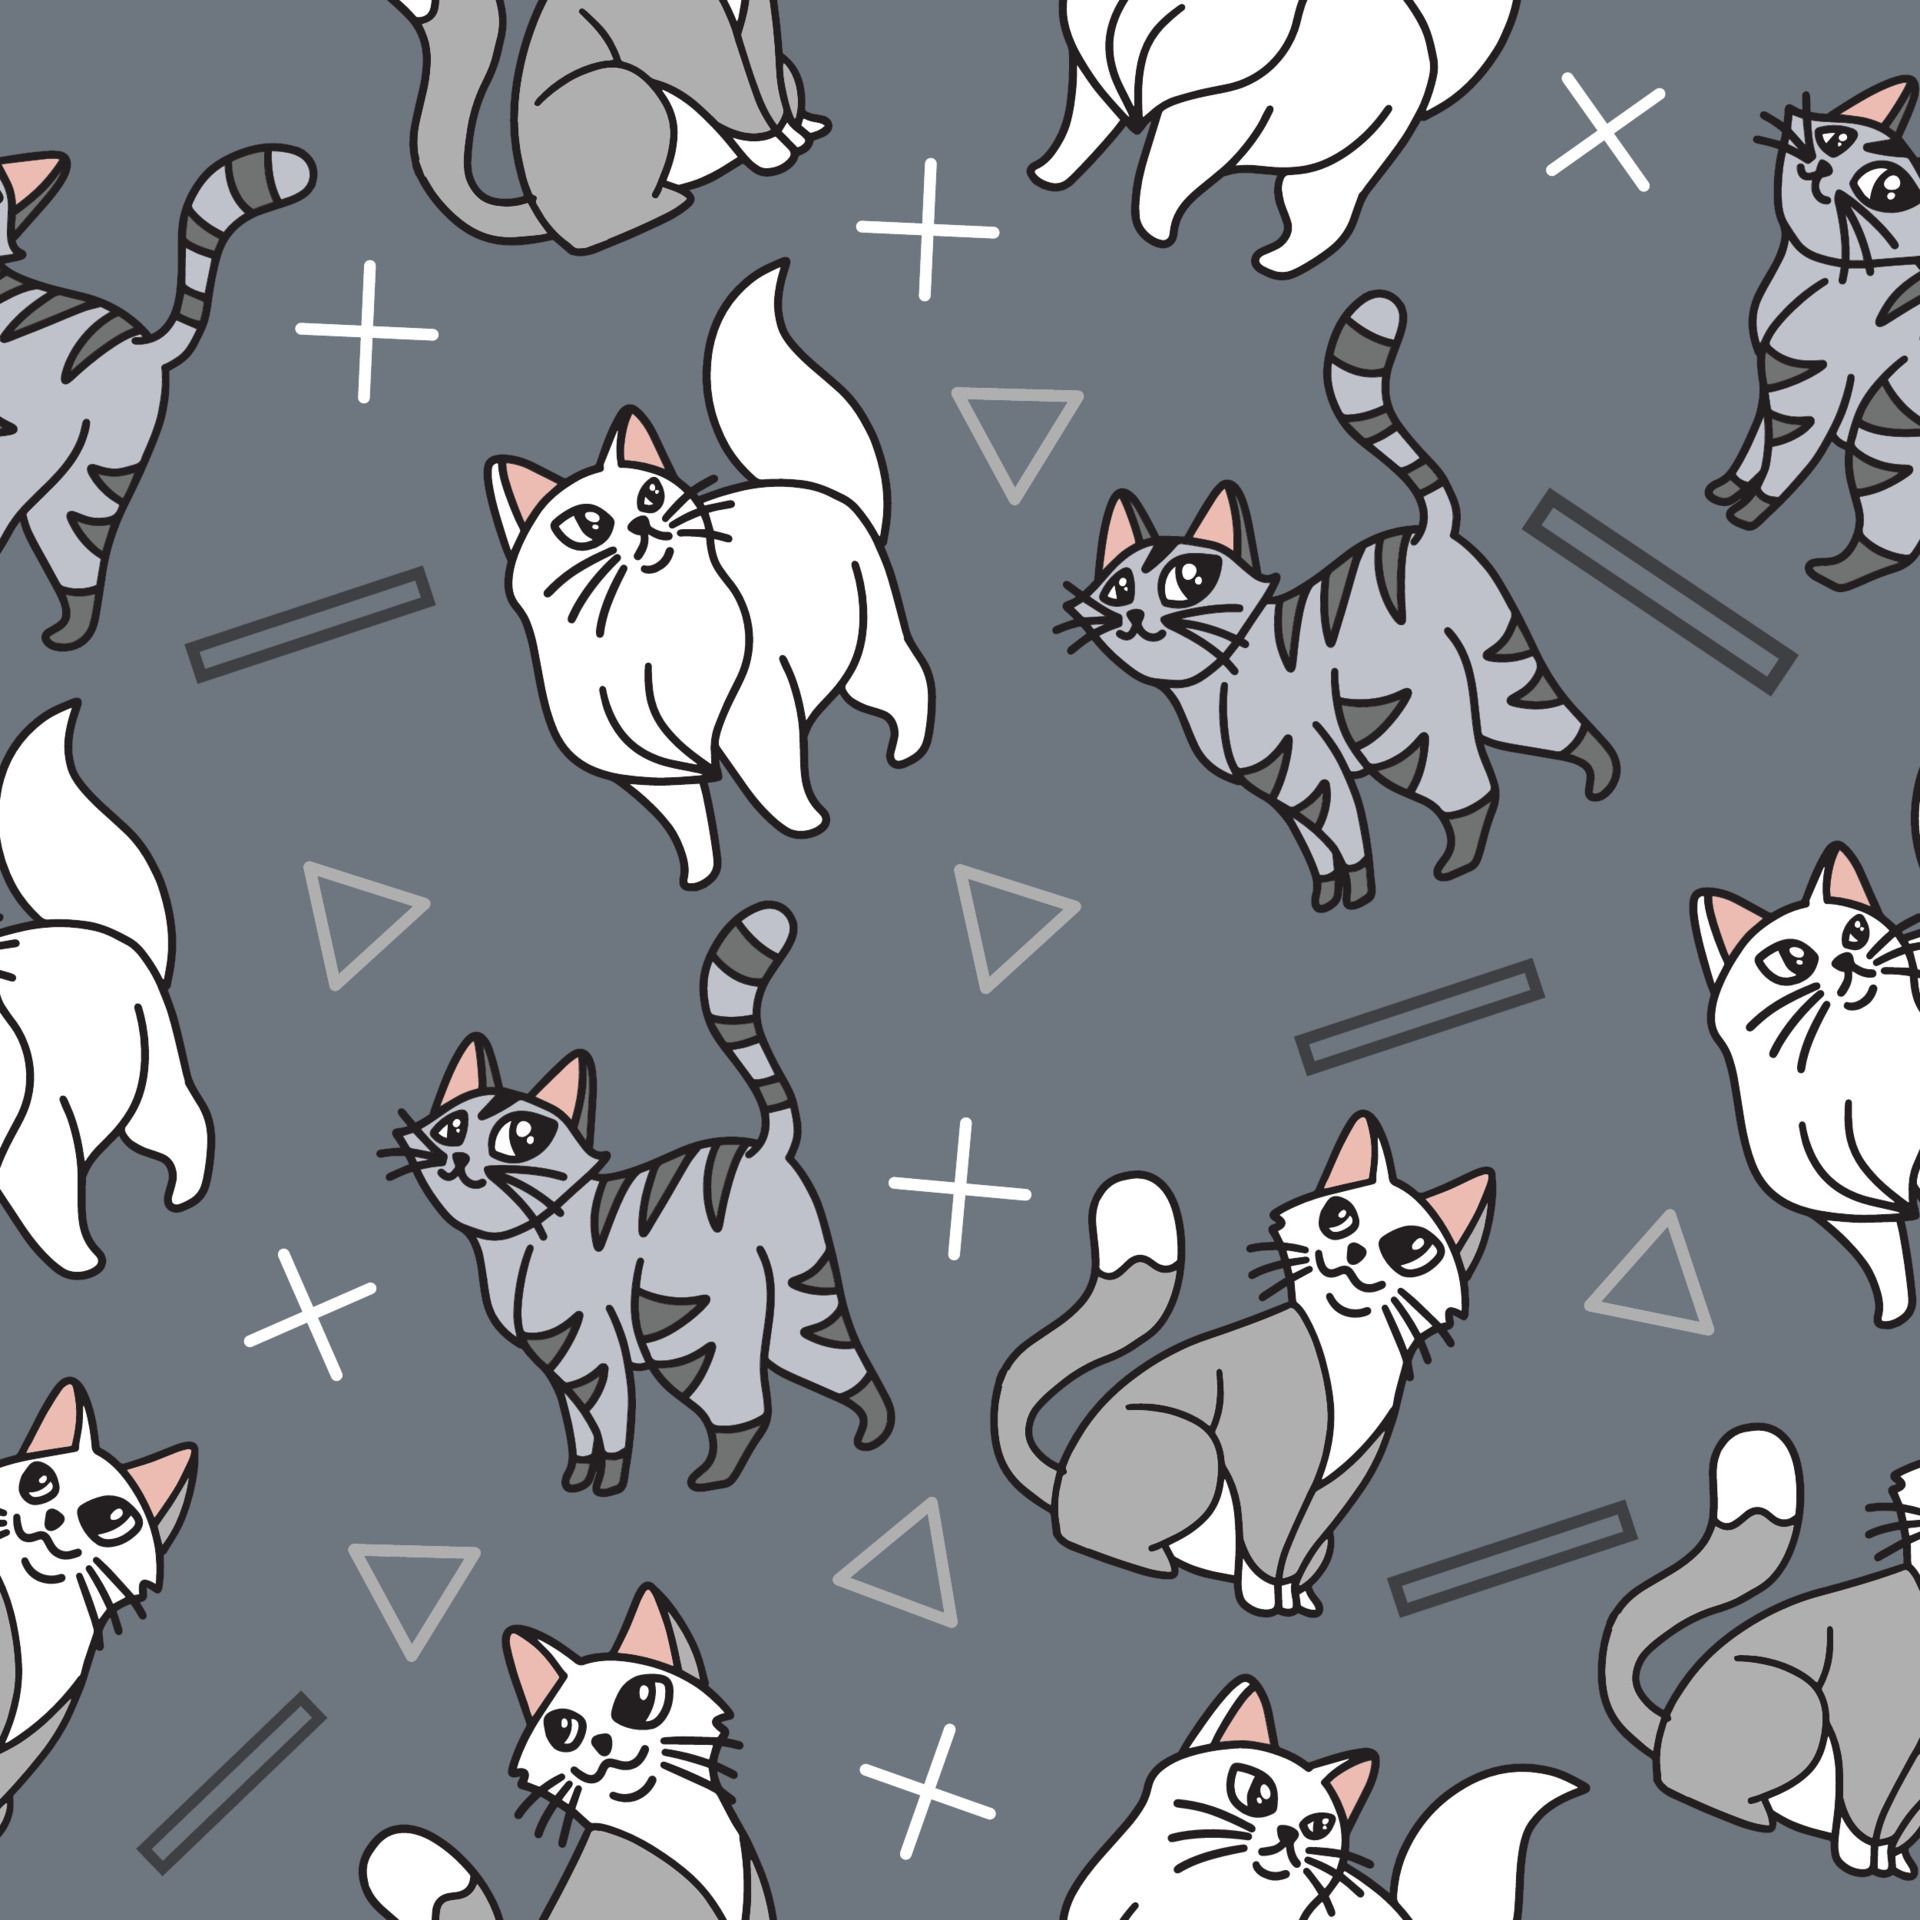 A grey and white pattern with cats and geometric shapes - Gray